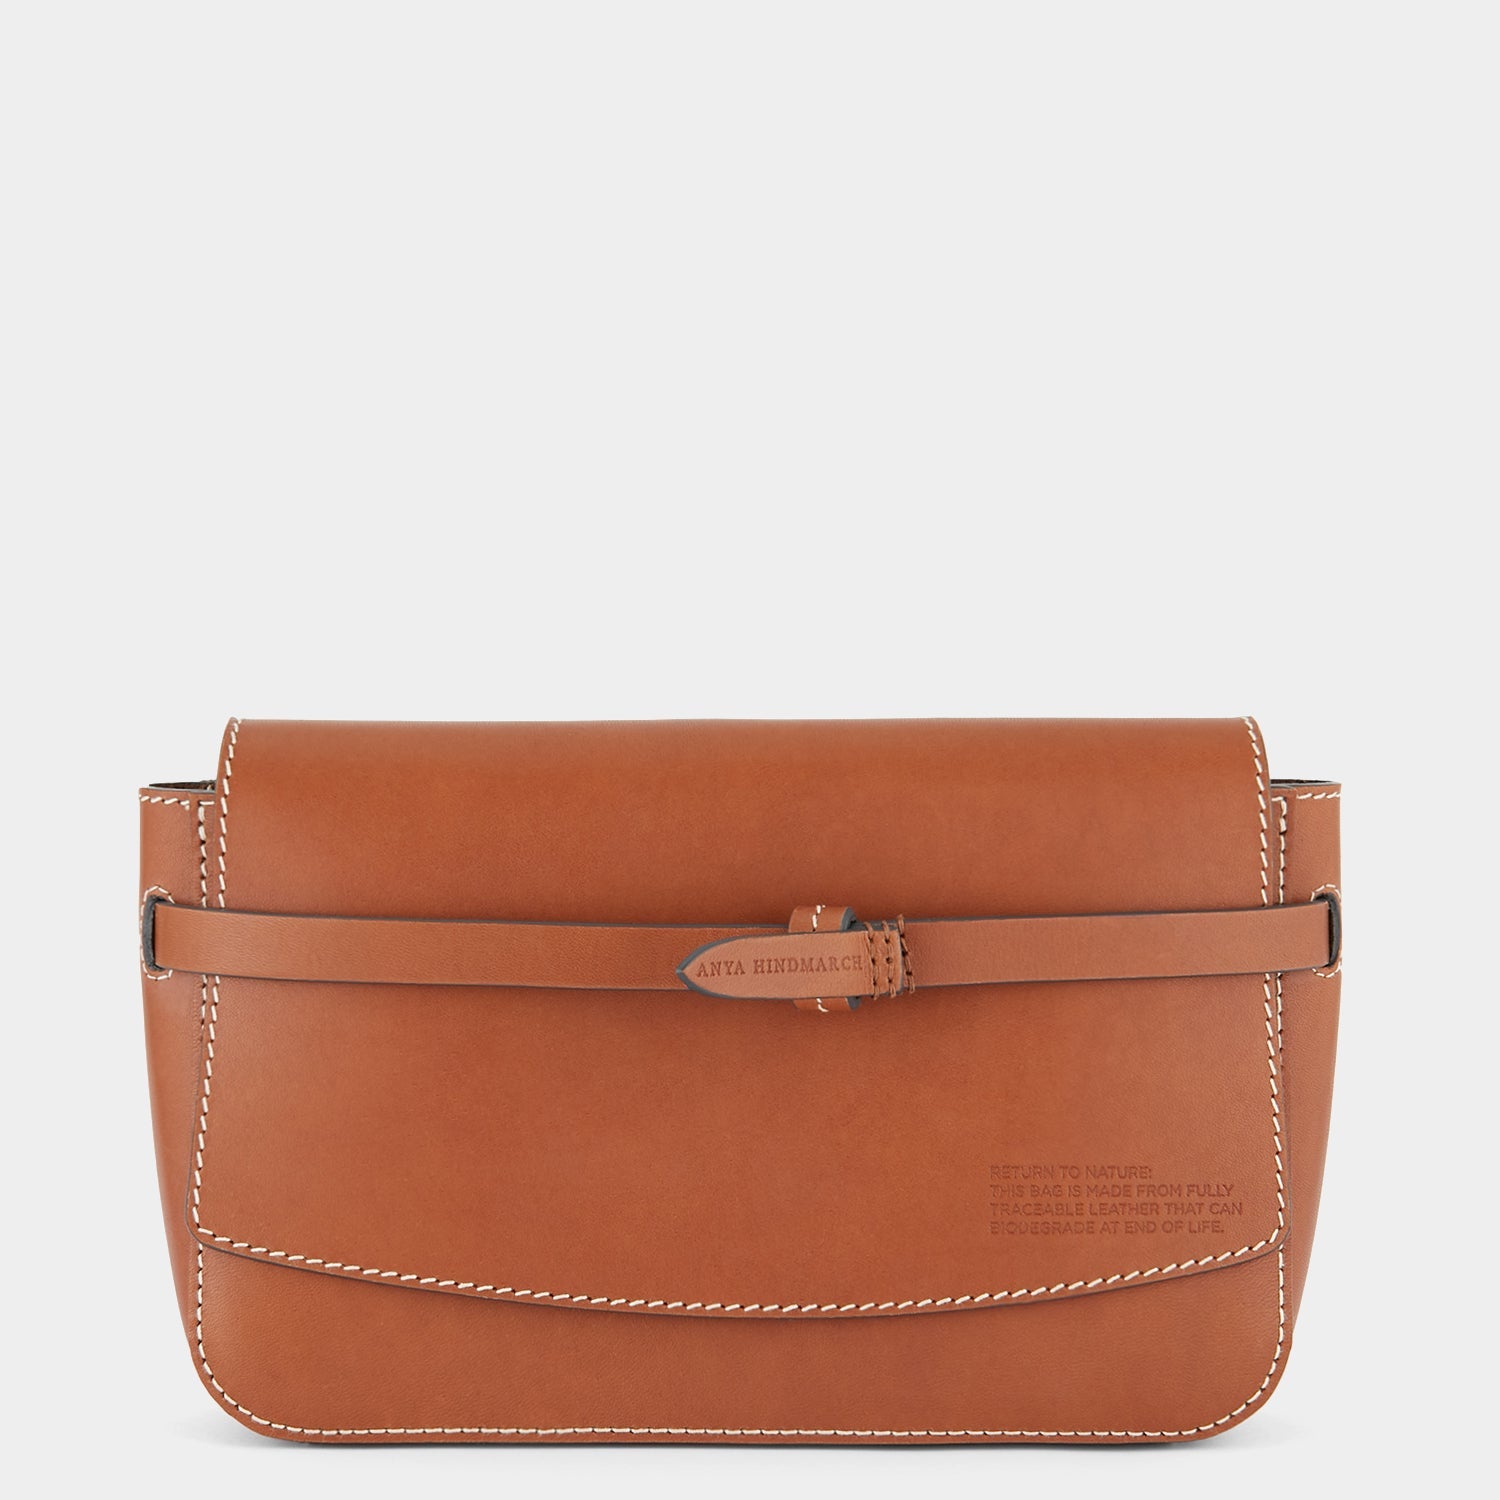 Return to Nature Clutch -

                  
                    Compostable Leather in Tan -
                  

                  Anya Hindmarch EU
